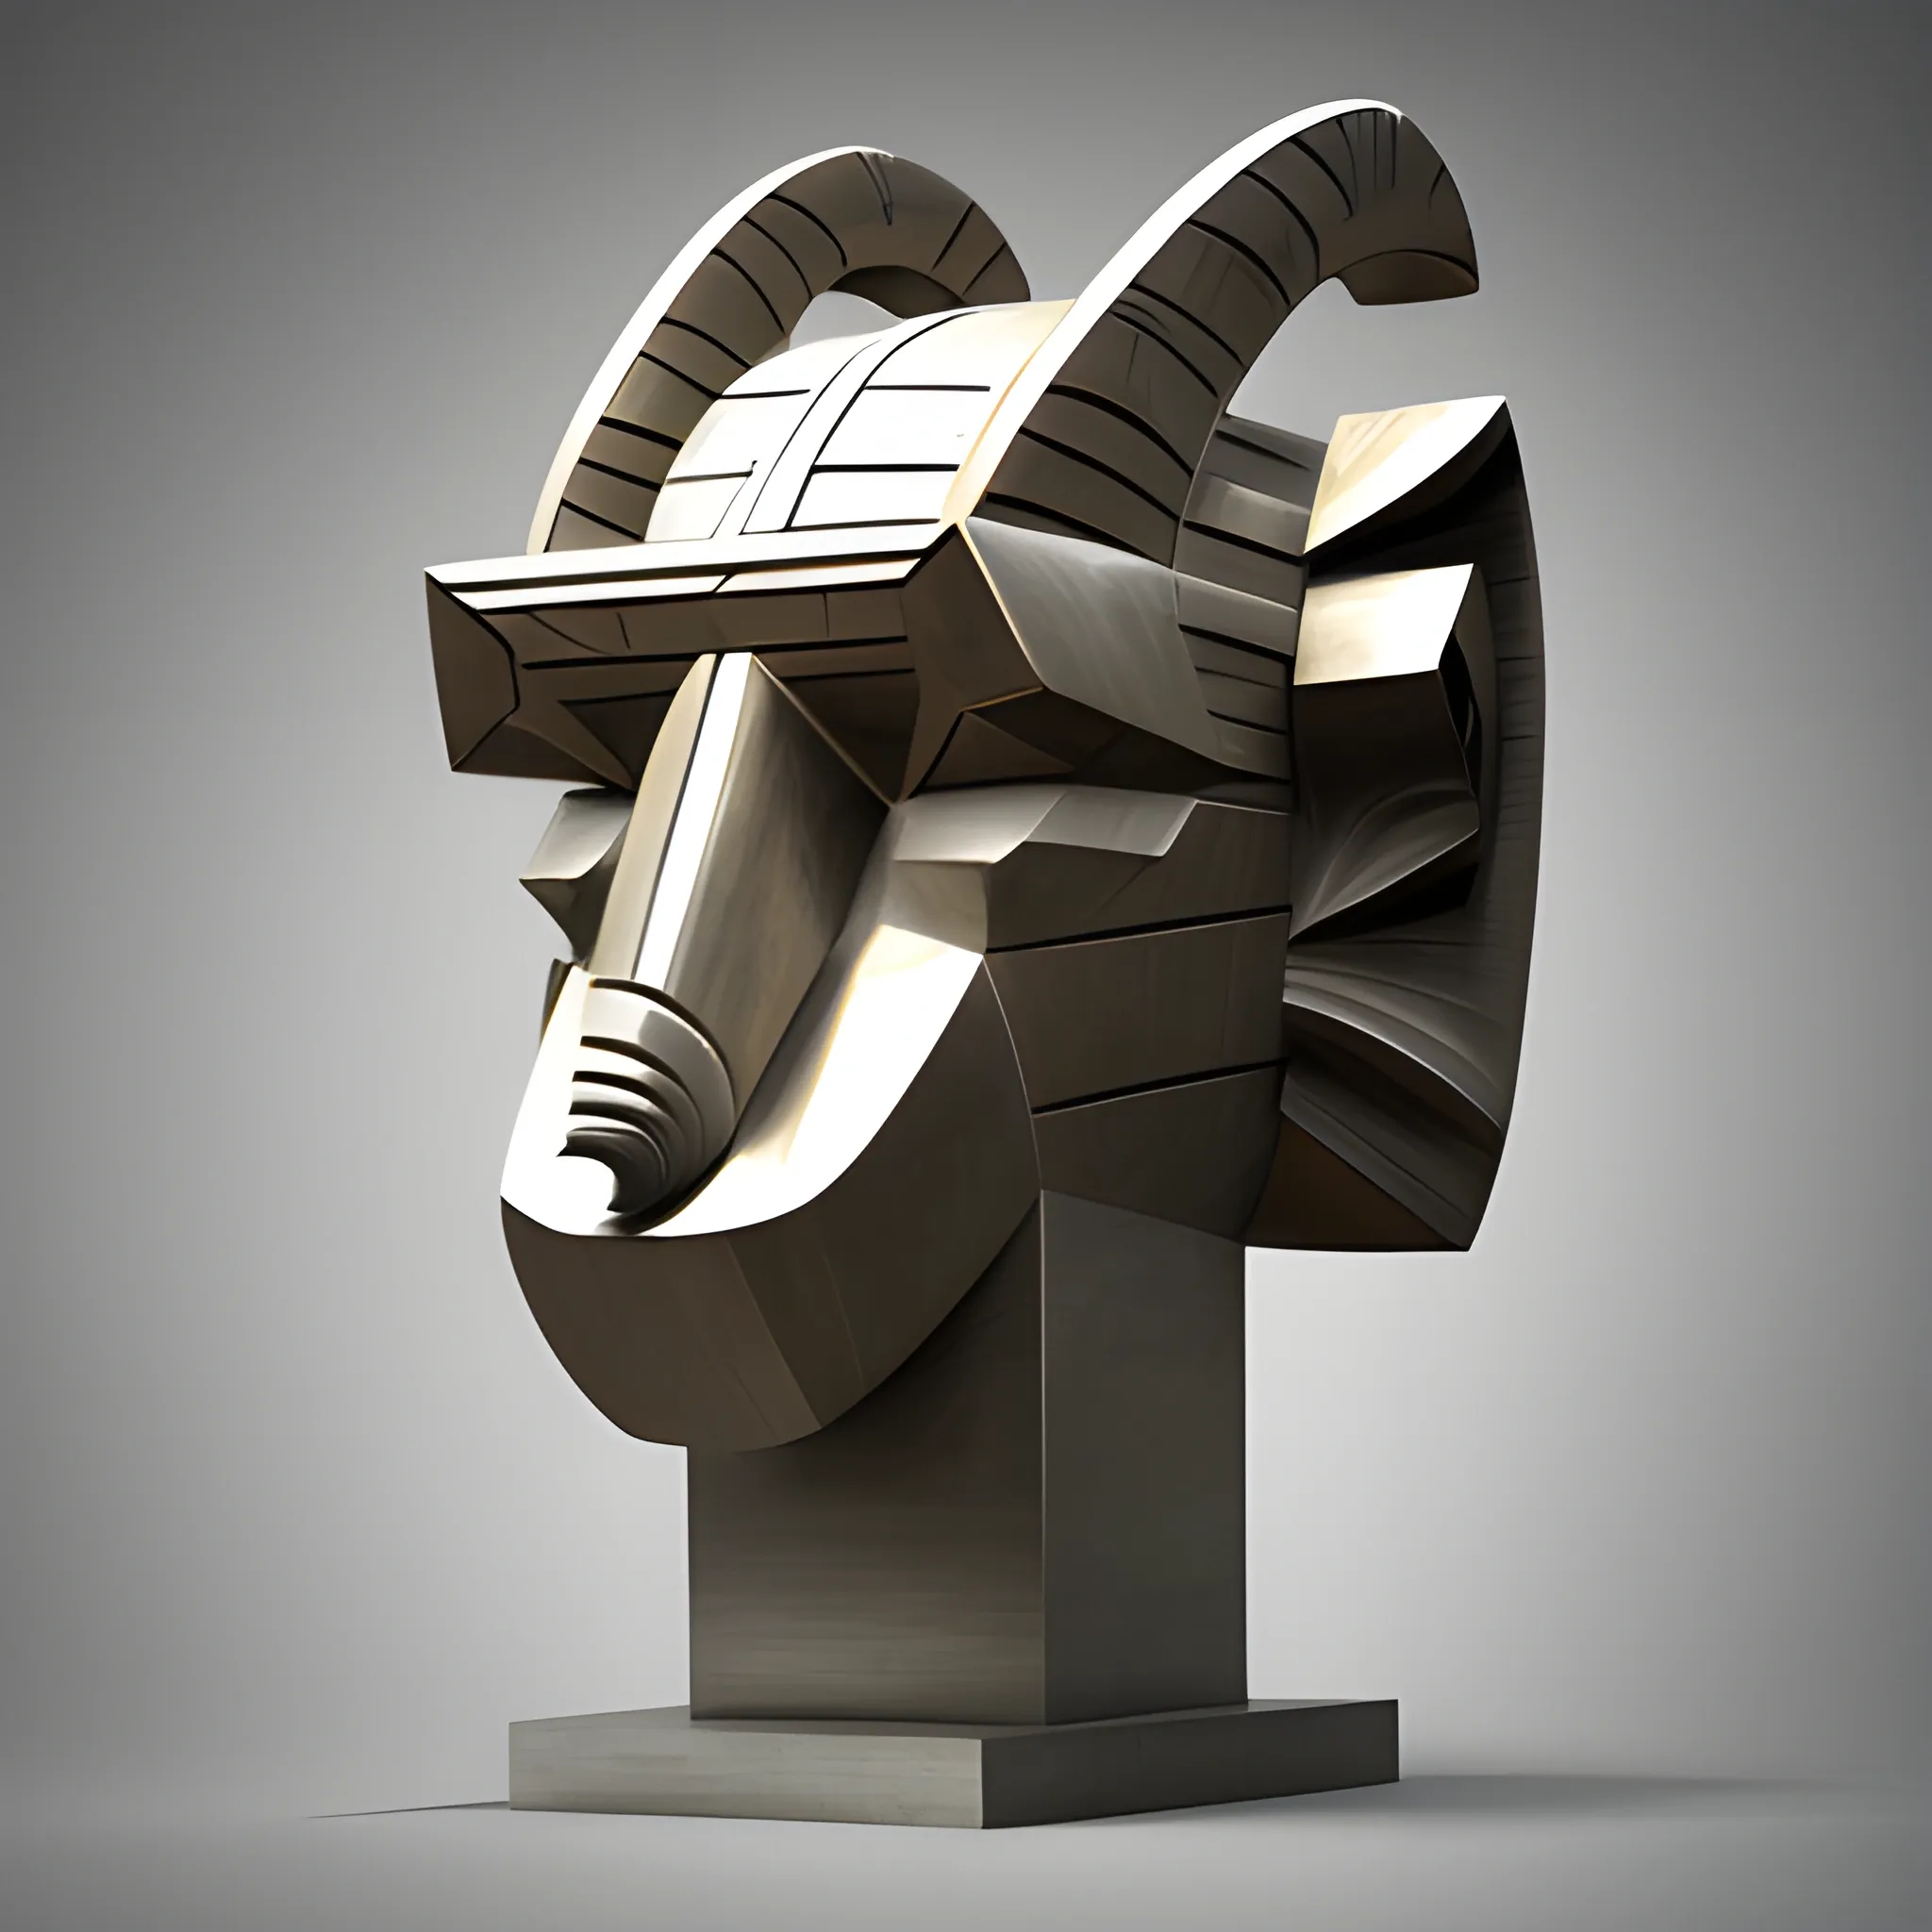 sculptural set in cubism Brancusi style , Big metalical Elephant featured native polynesian mask, gear and riveted steel, digital matte realistic surface, sharp focus, elegant intricate digital painting, abstract concept, art global illumination, ray tracing advanced technology, simple composition, elegant shapes, glam monumental, low perspective look

